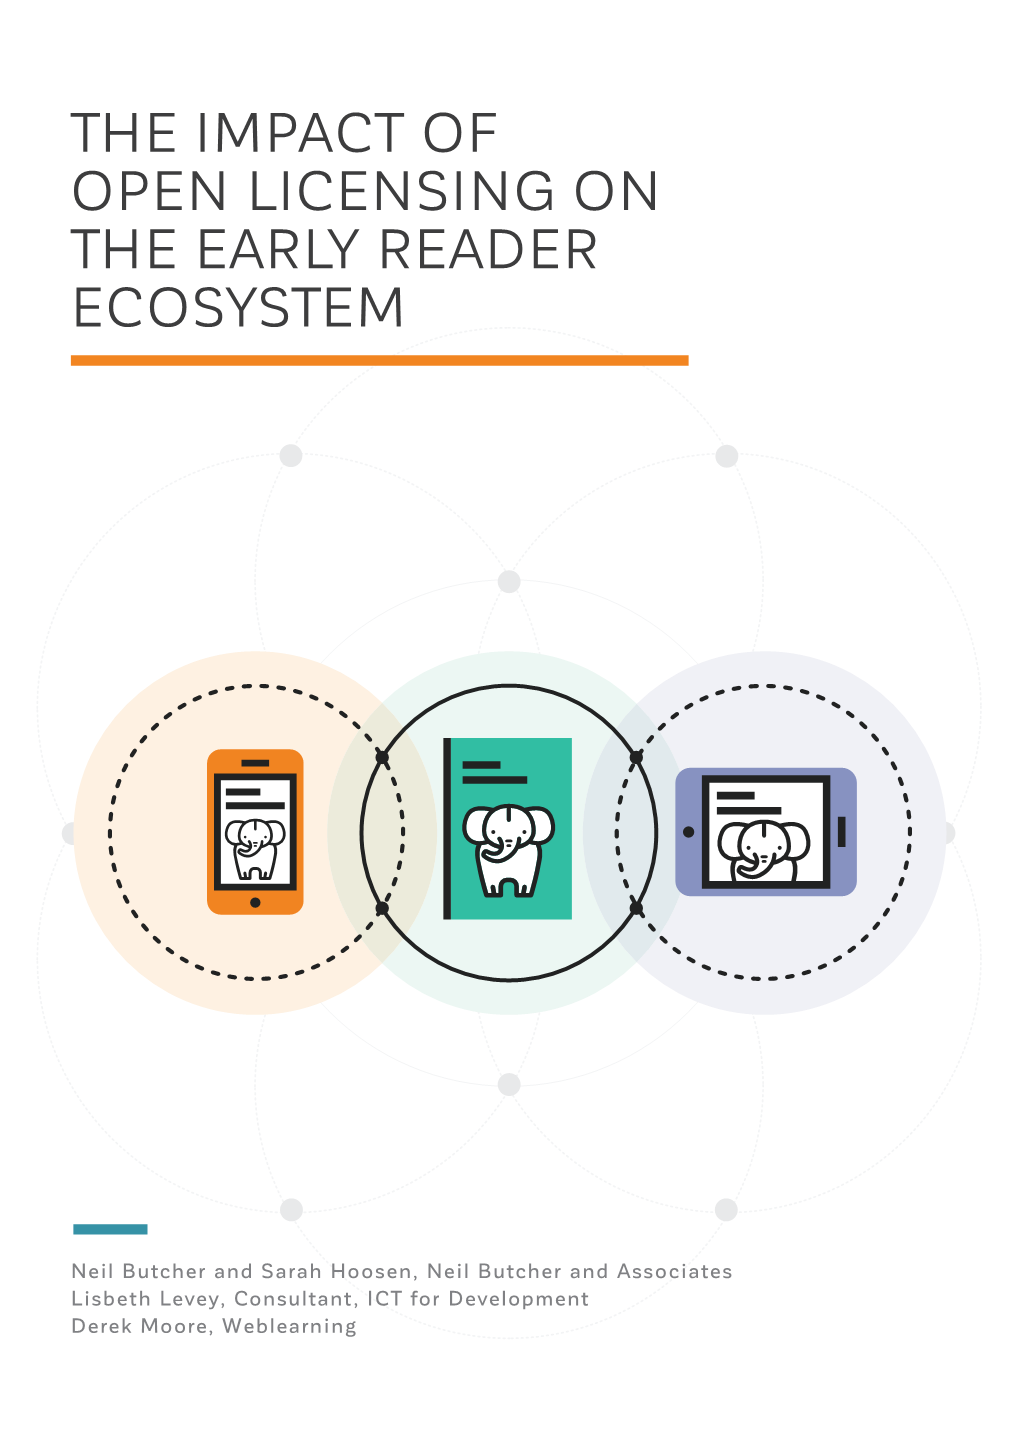 The Impact of Open Licensing on the Early Reader Ecosystem